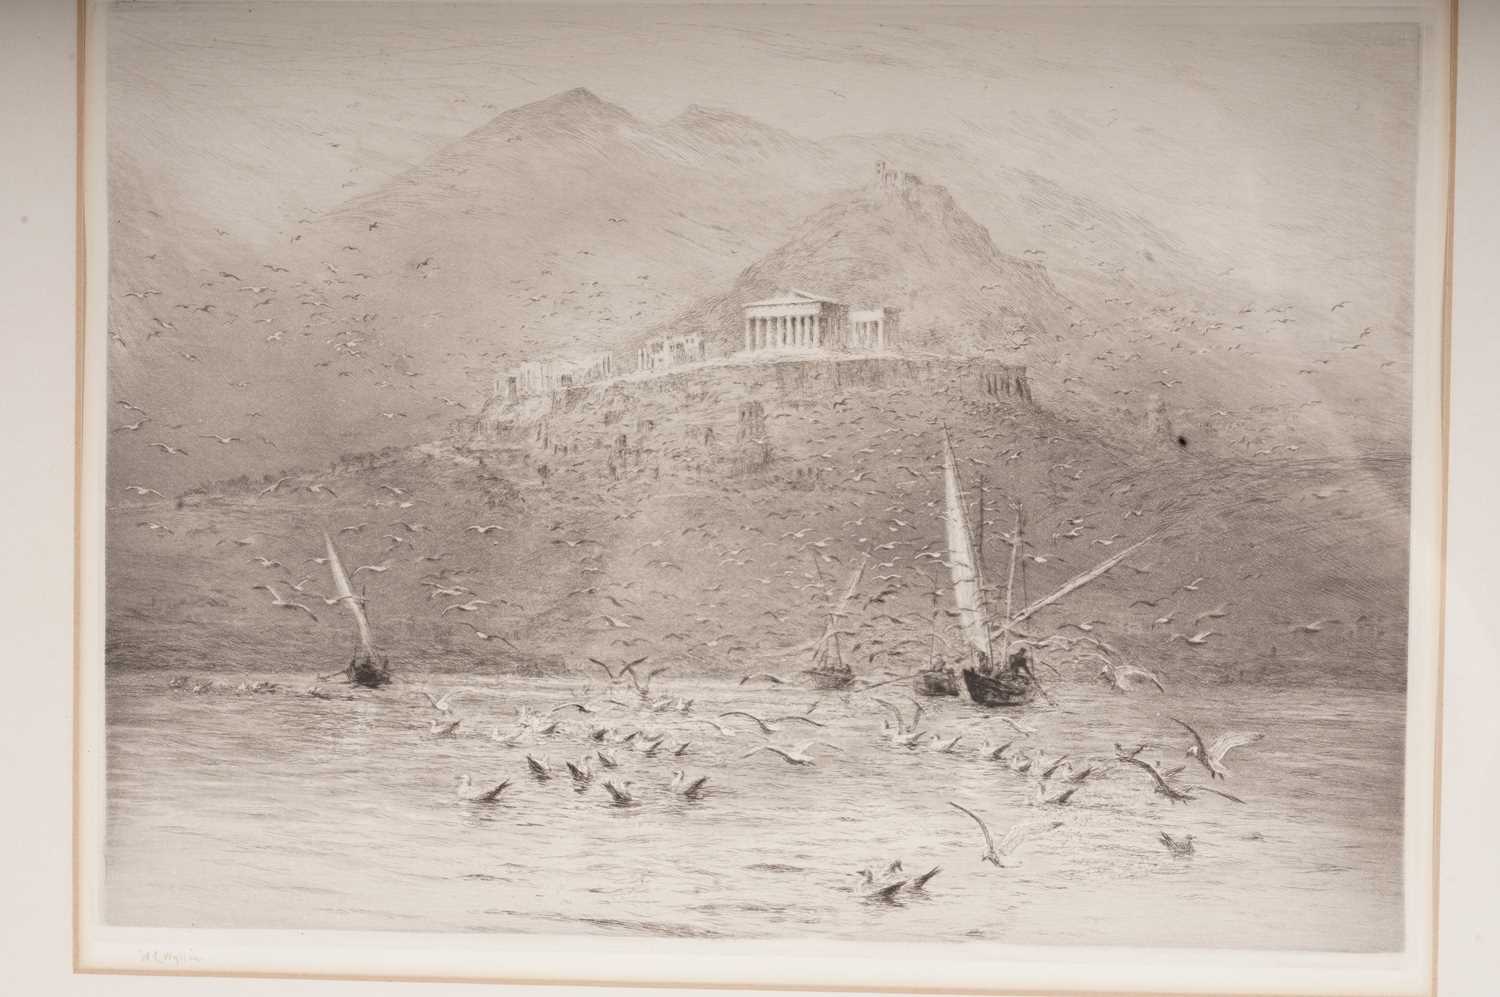 William Lionel Wyllie - "The Poseidon Temple, Attica" | dry point - Image 3 of 12